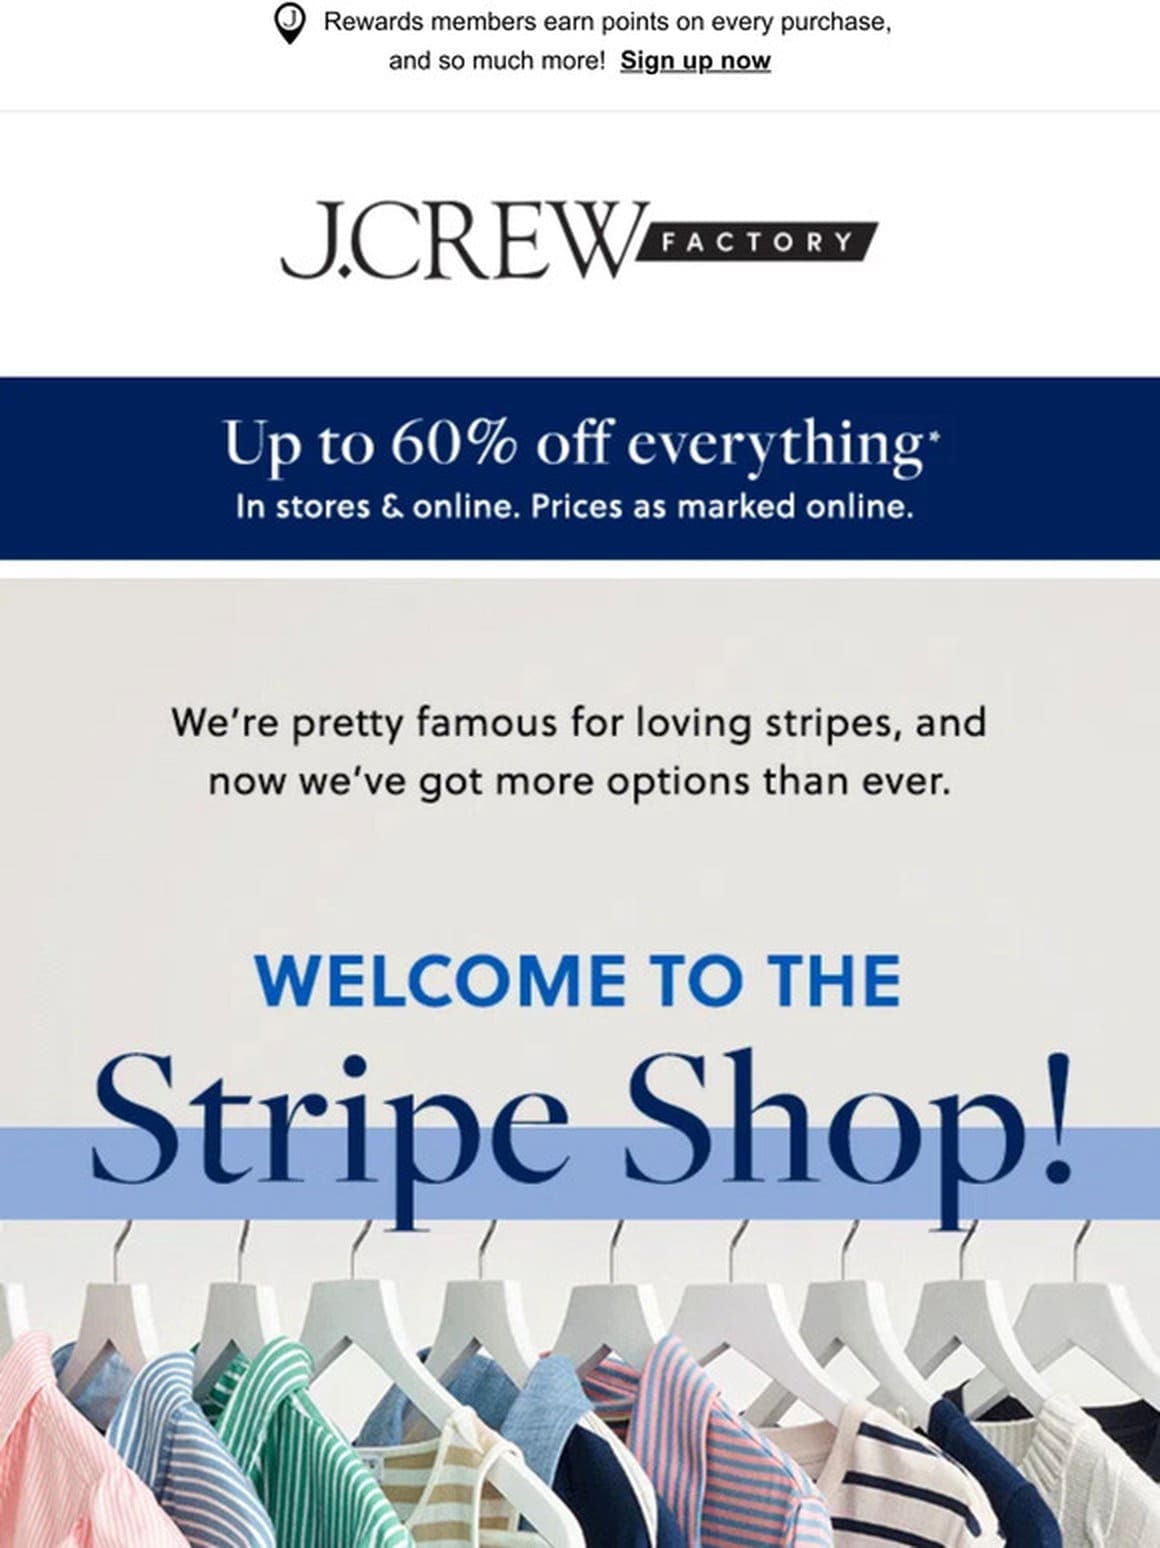 The Stripe Shop is open! GET IN LINE for up to 60% off! + A BIG DEAL on swim…